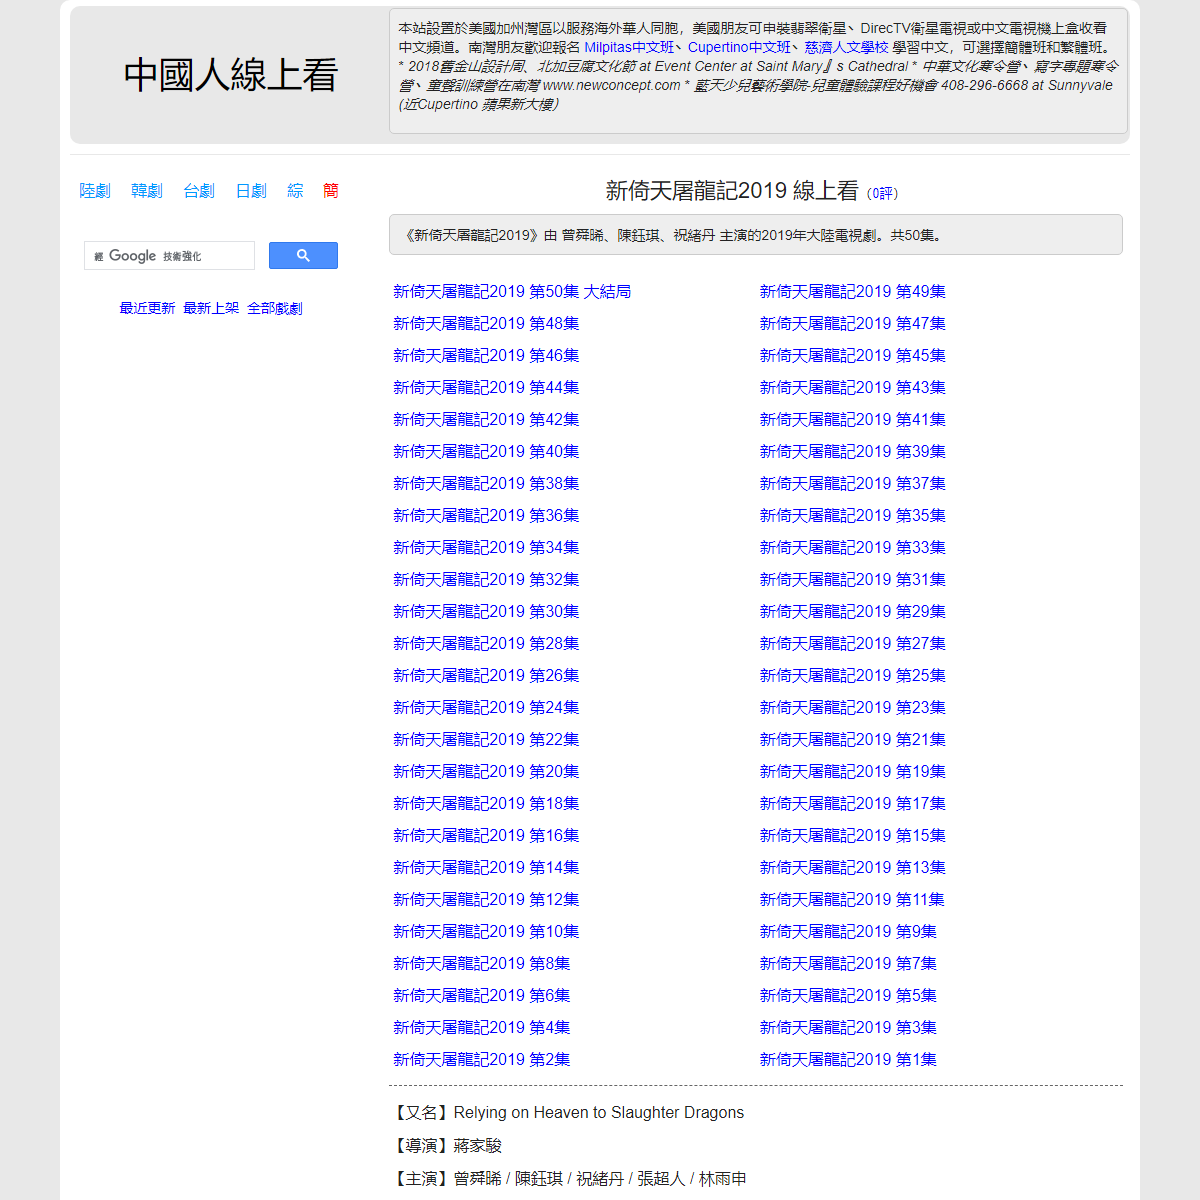 A complete backup of https://chinaq.tv/cn190227d/